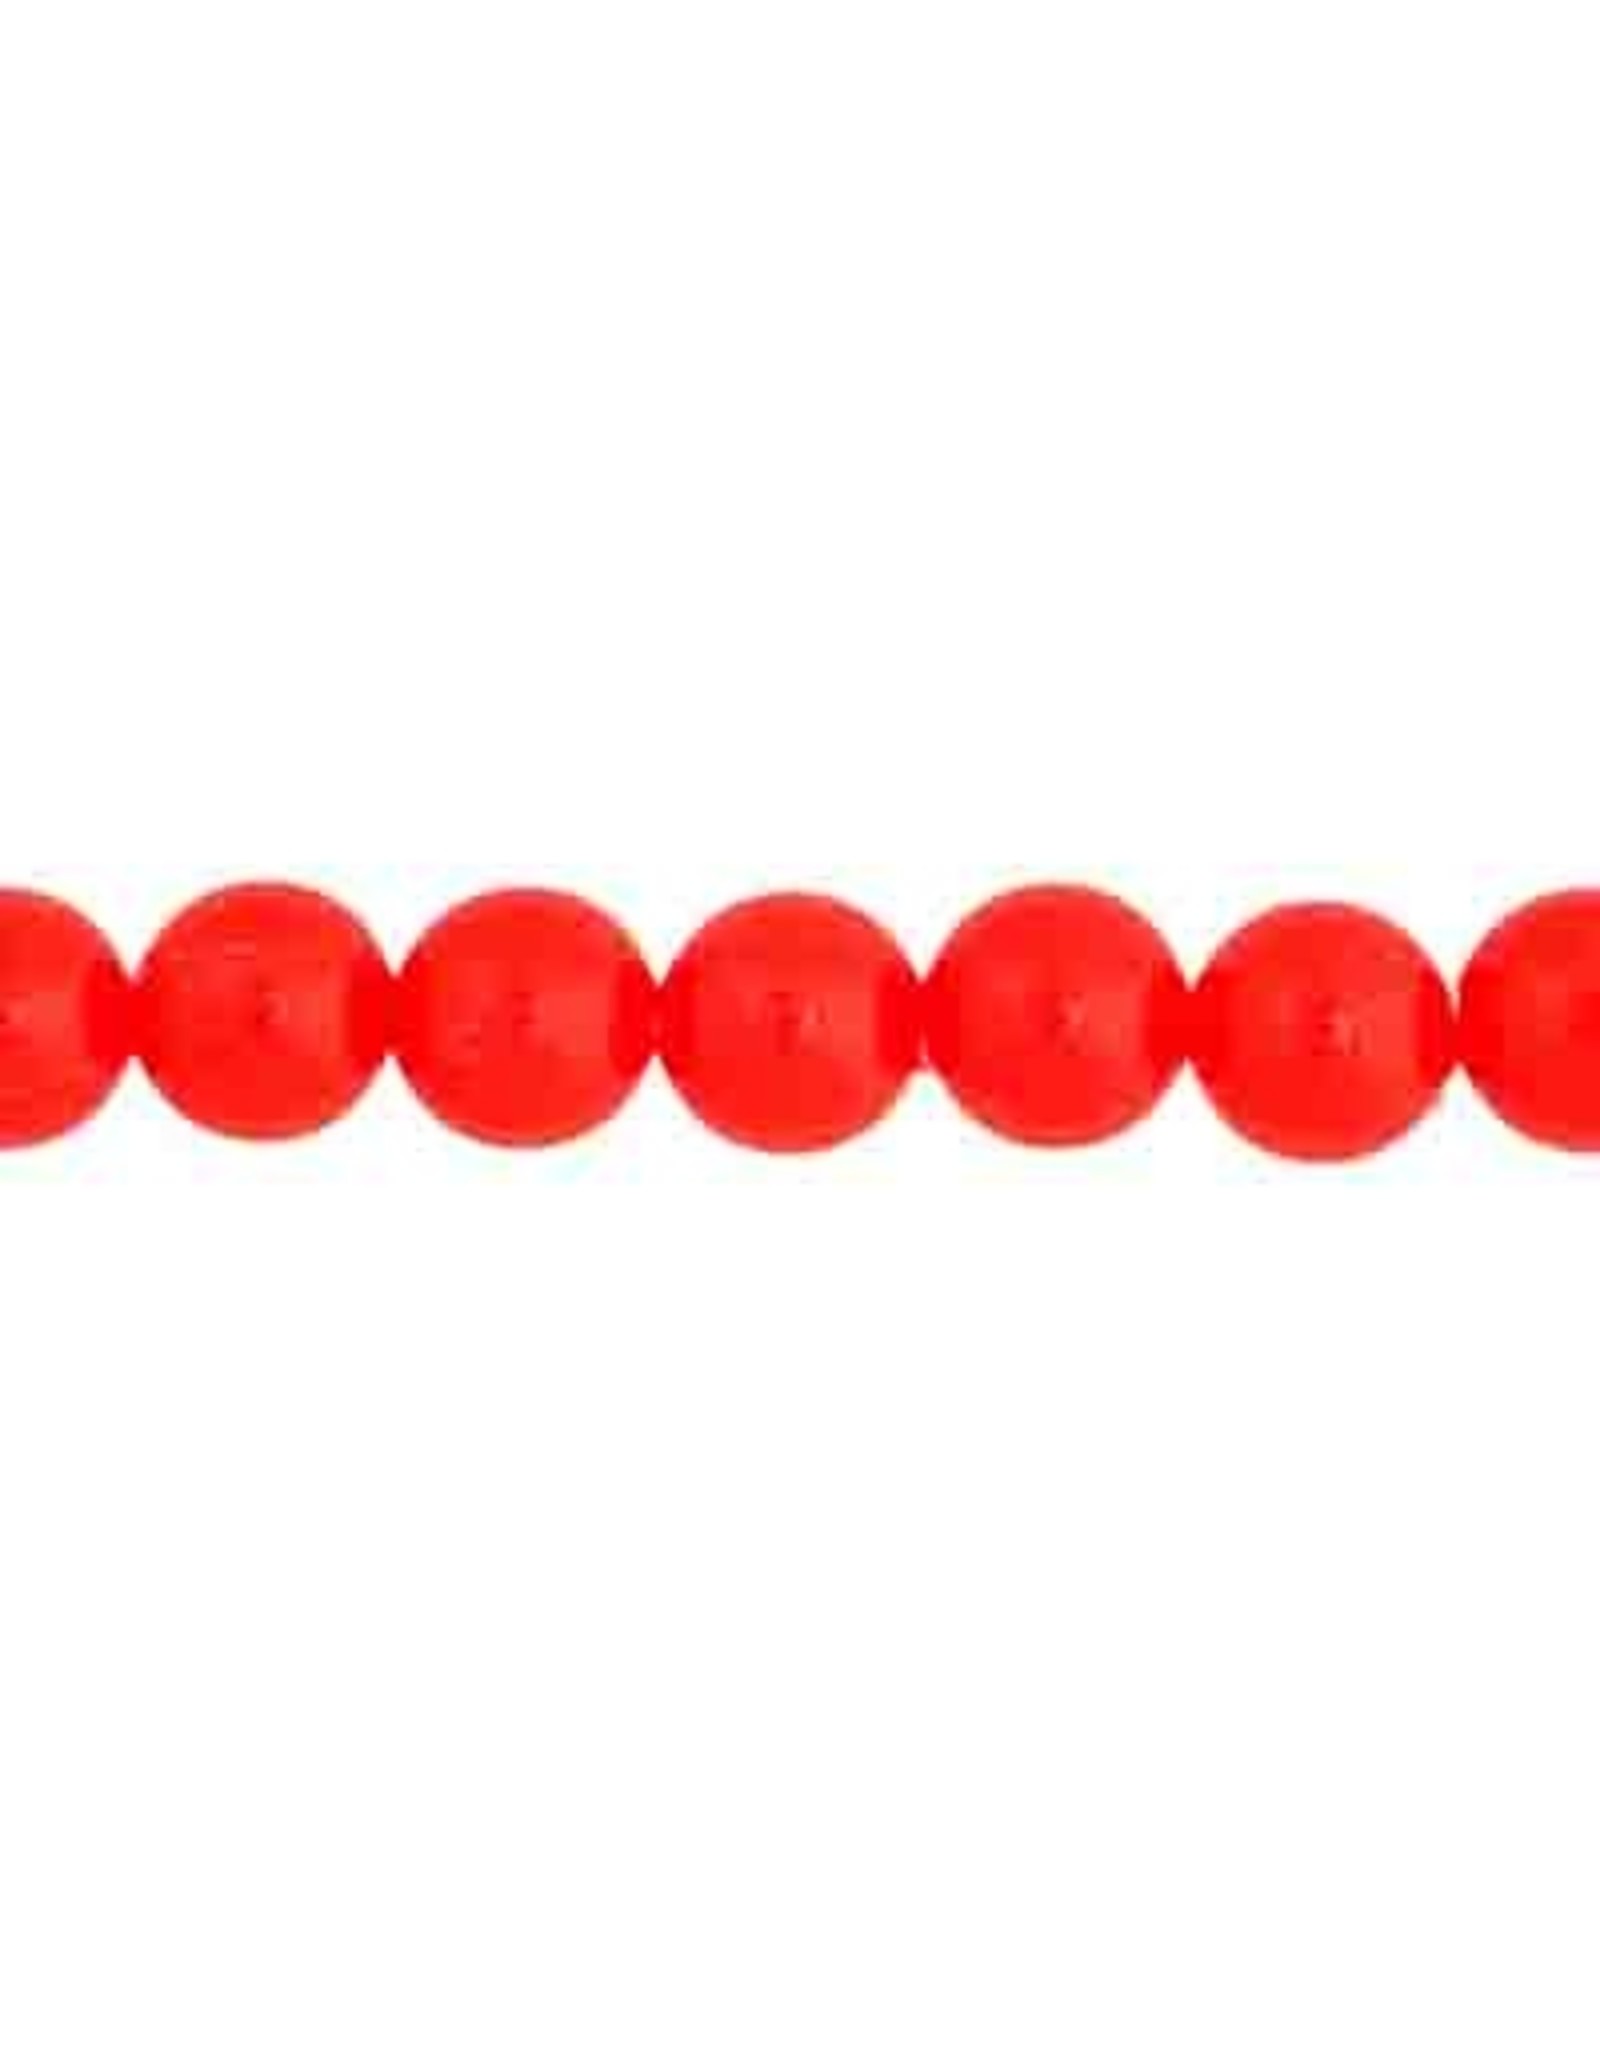 Round  6mm Opaque Neon Red  x100